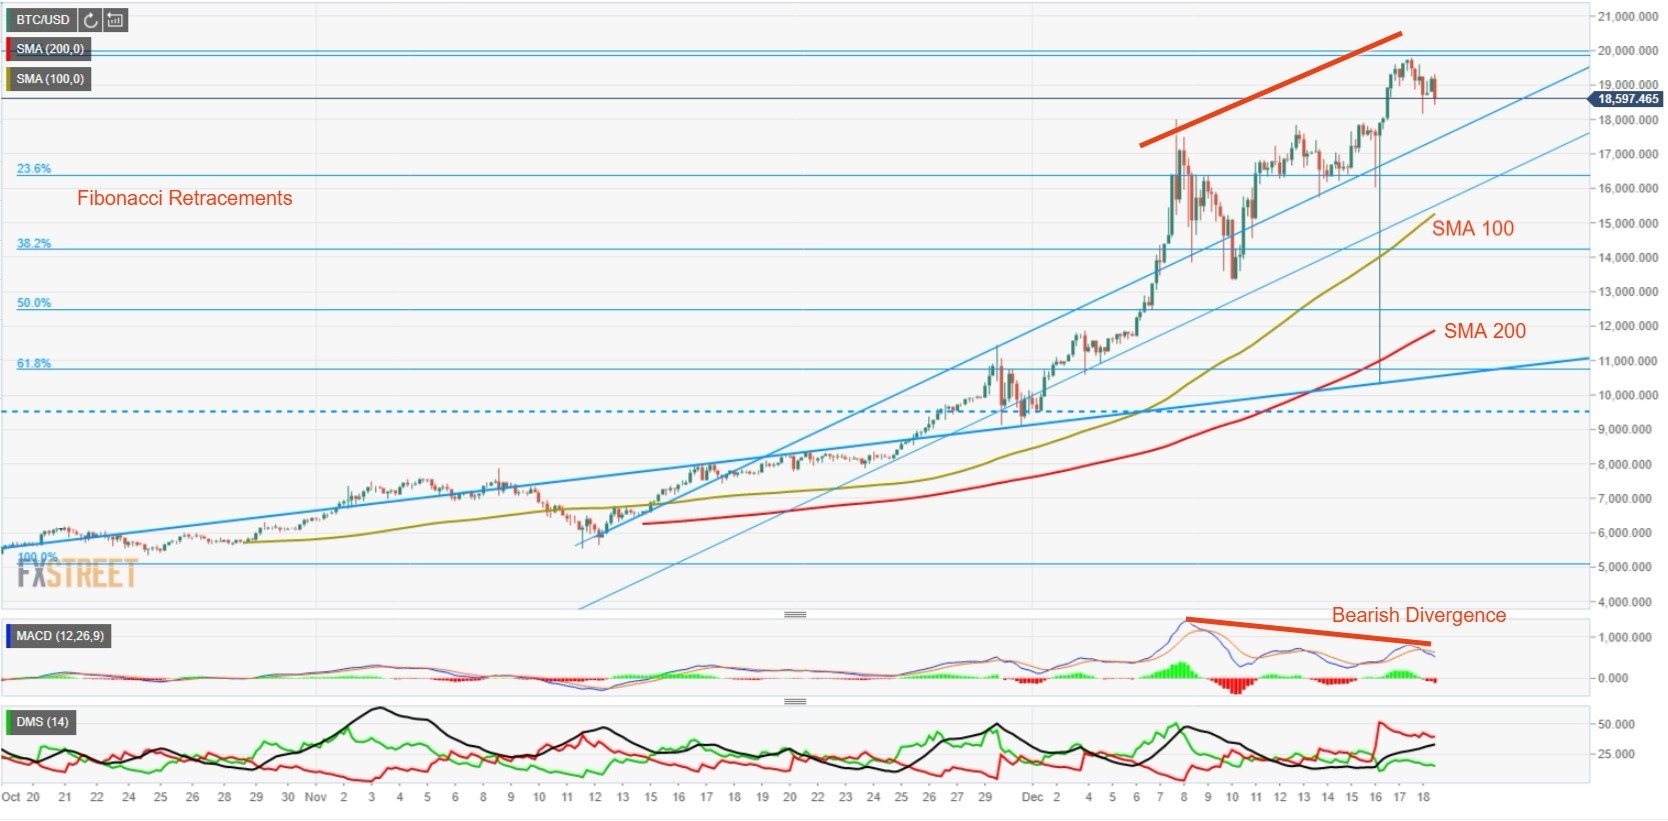 Best 2018 Bitcoin Price Predictions Btc Usd Projections From 8 073 - 